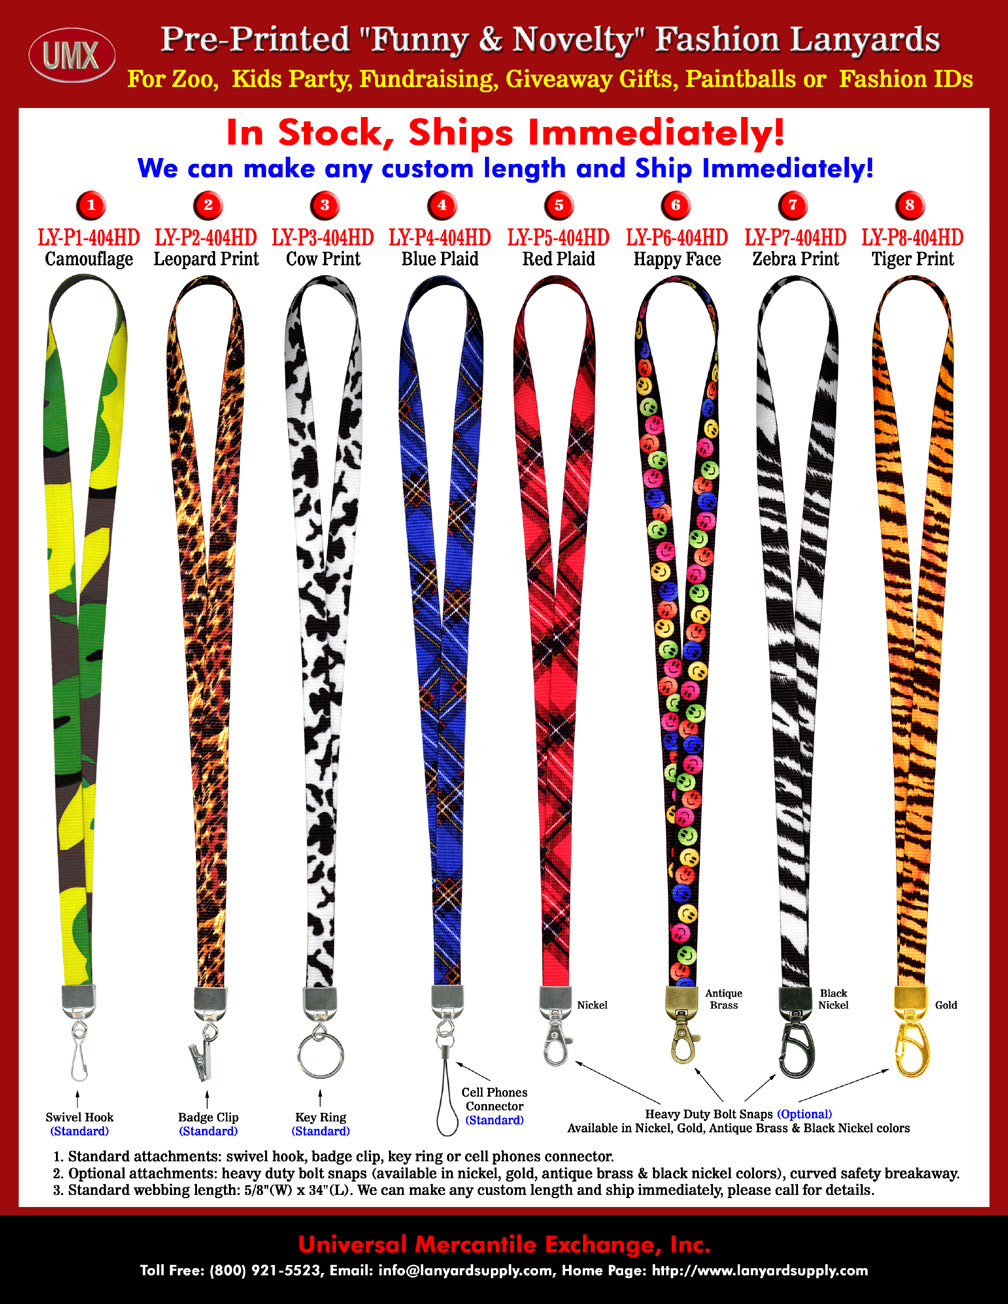 The deluxe key lanyards or key carrying straps are unique designs for carrying keys from lost.